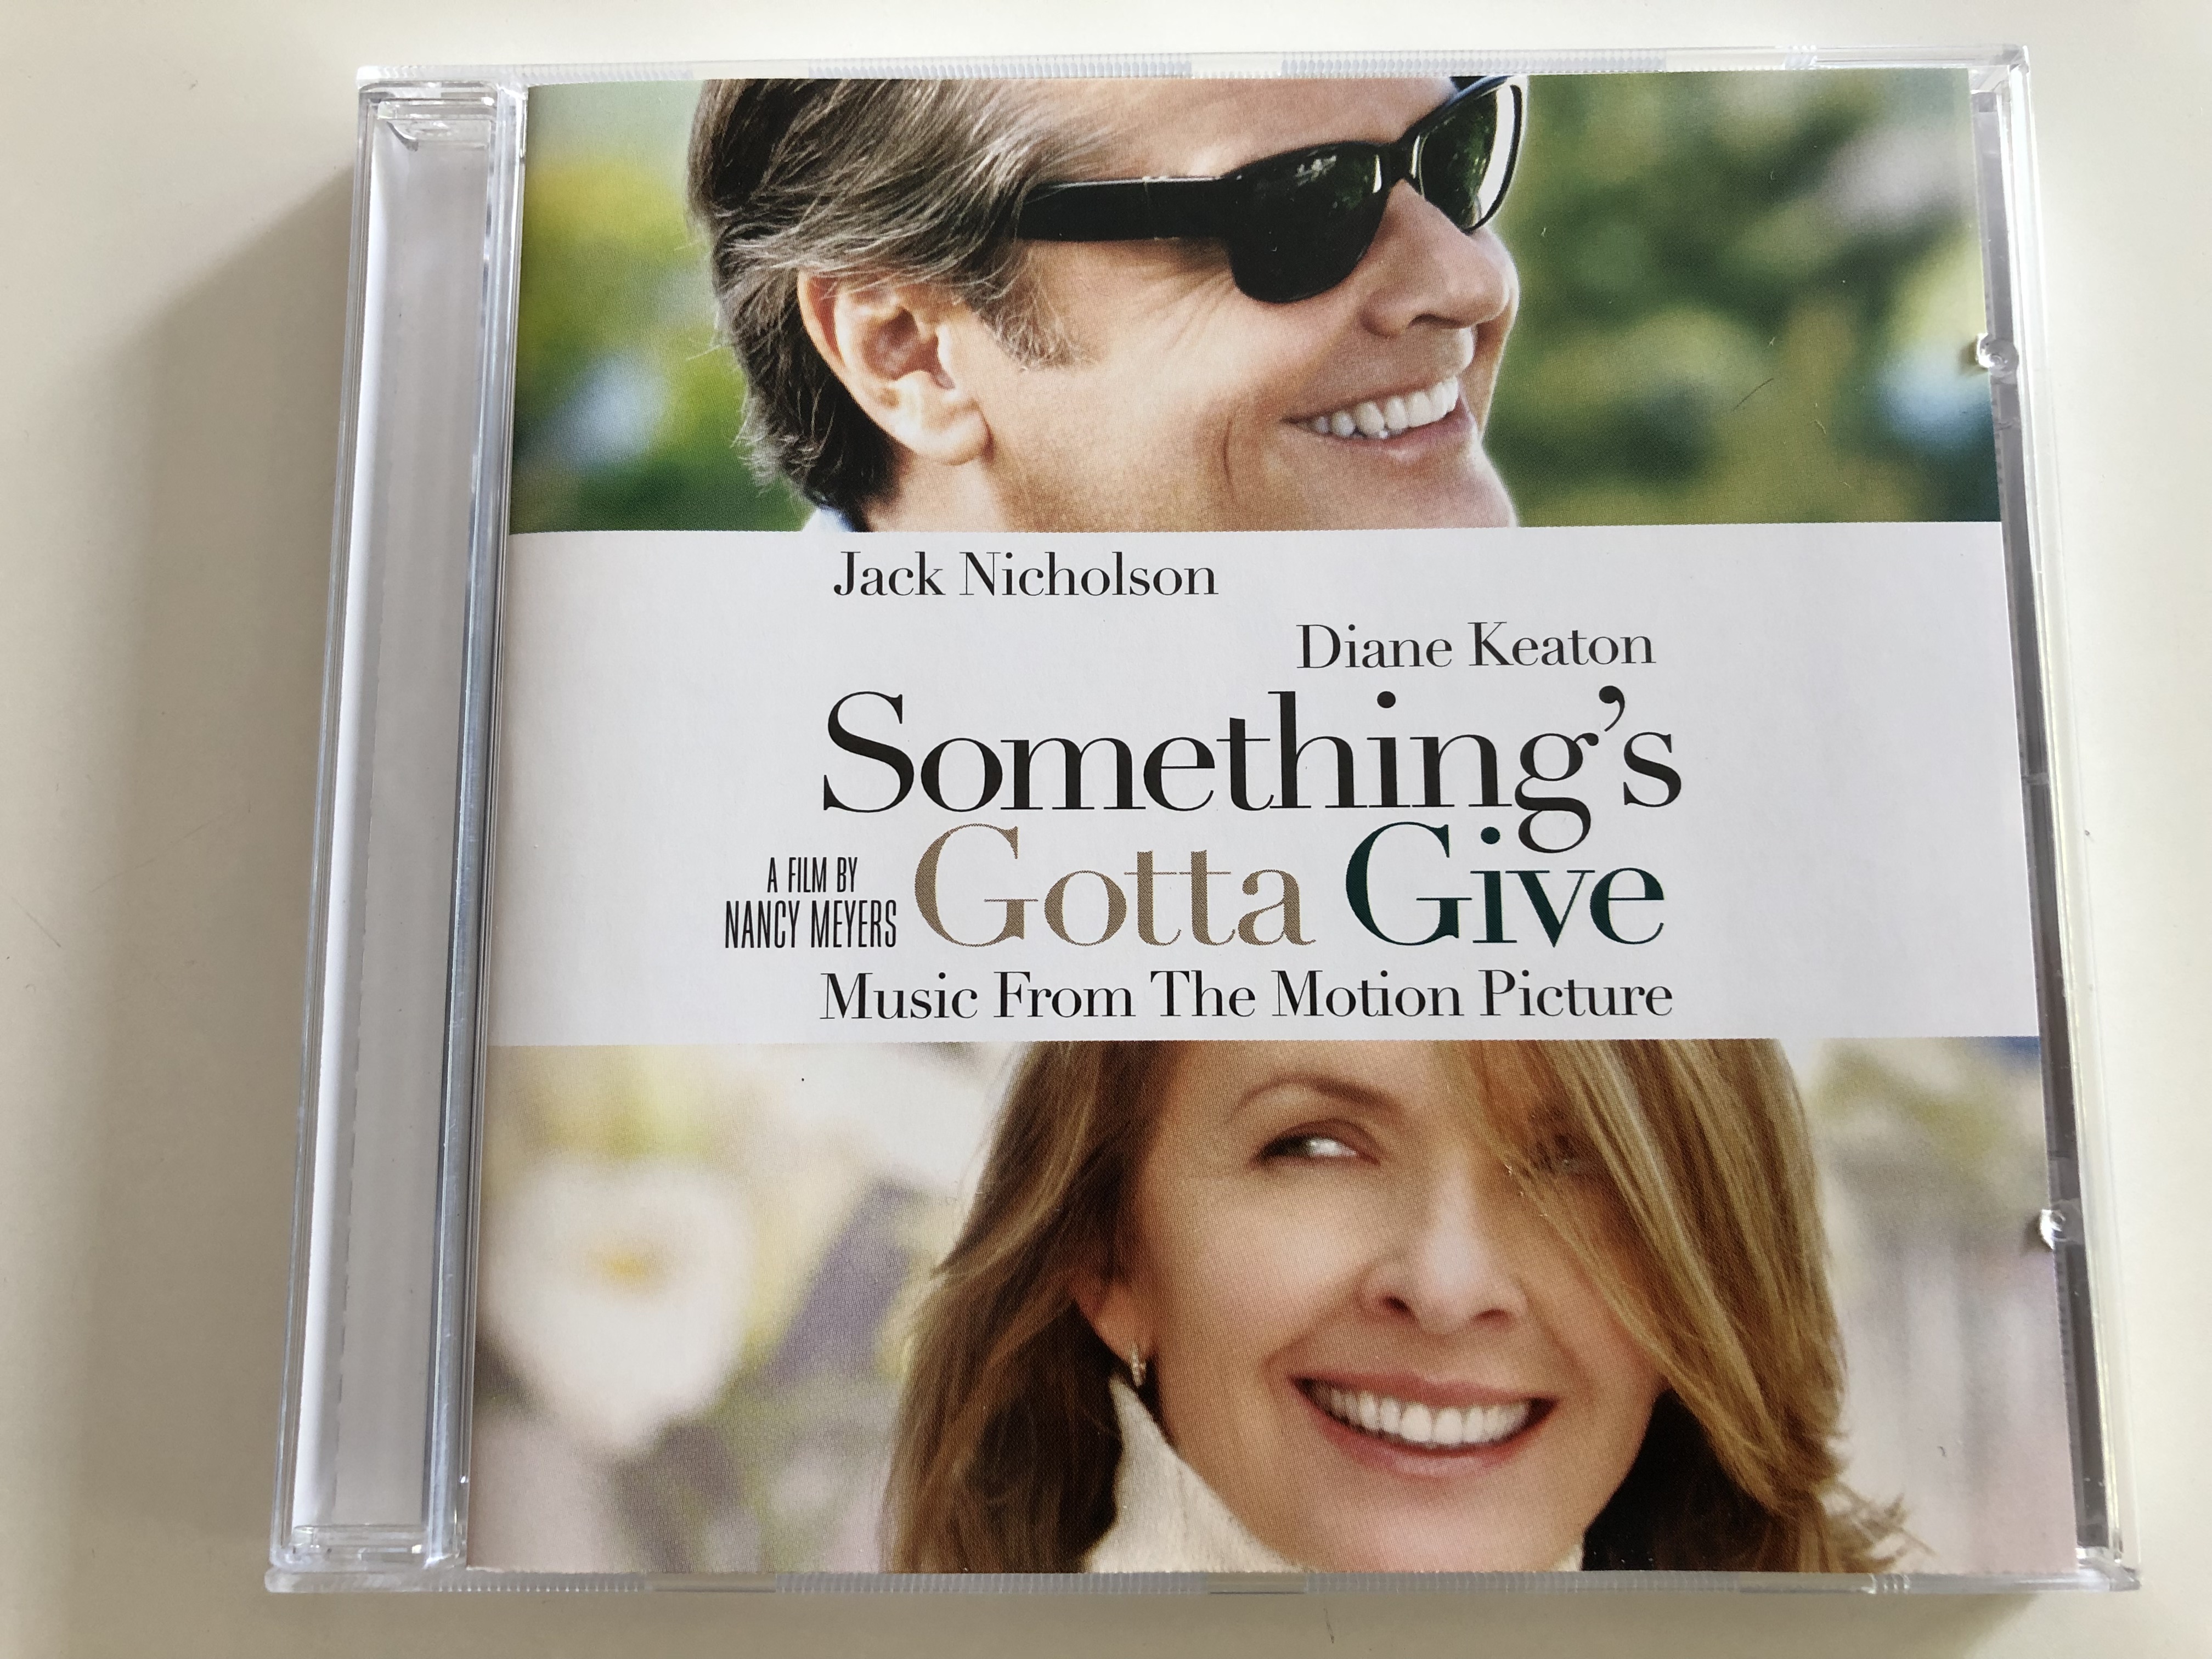 something-s-gotta-give-jack-nicholson-diane-keaton-music-from-the-motion-picture-a-film-by-nancy-meyers-audio-cd-2003-col-515035-2-1-.jpg